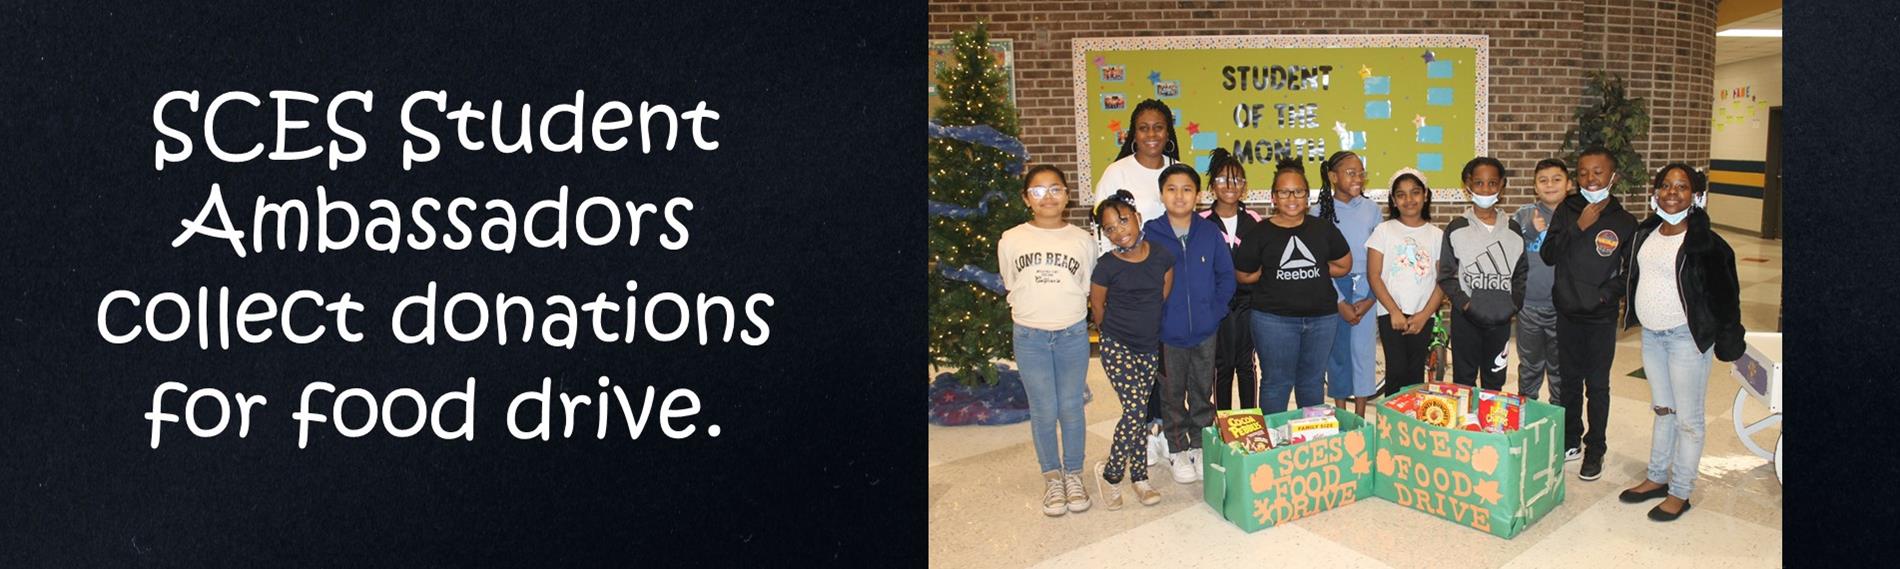 SCES Student Ambassadors Collect Food for Food Drive 